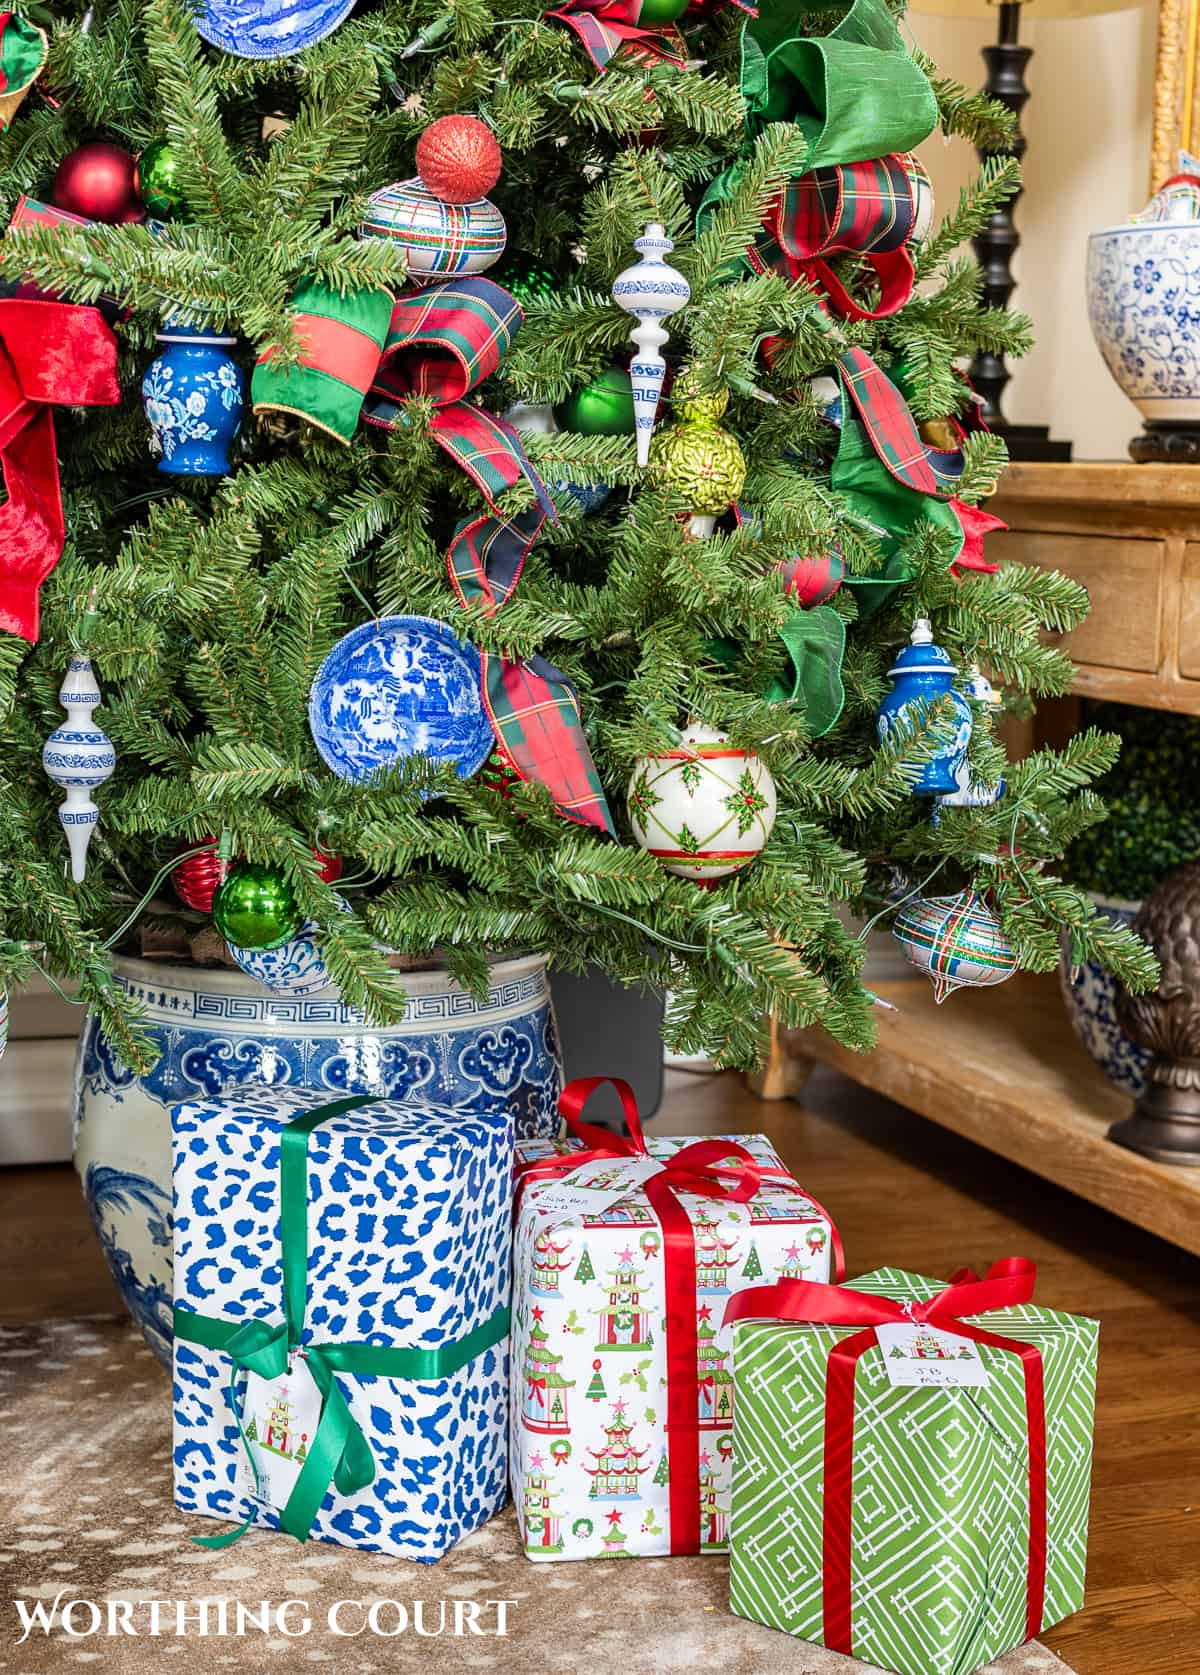 gifts at base of Christmas tree with traditional decorations and presents wrapped in colorful Christmas wrapping paper